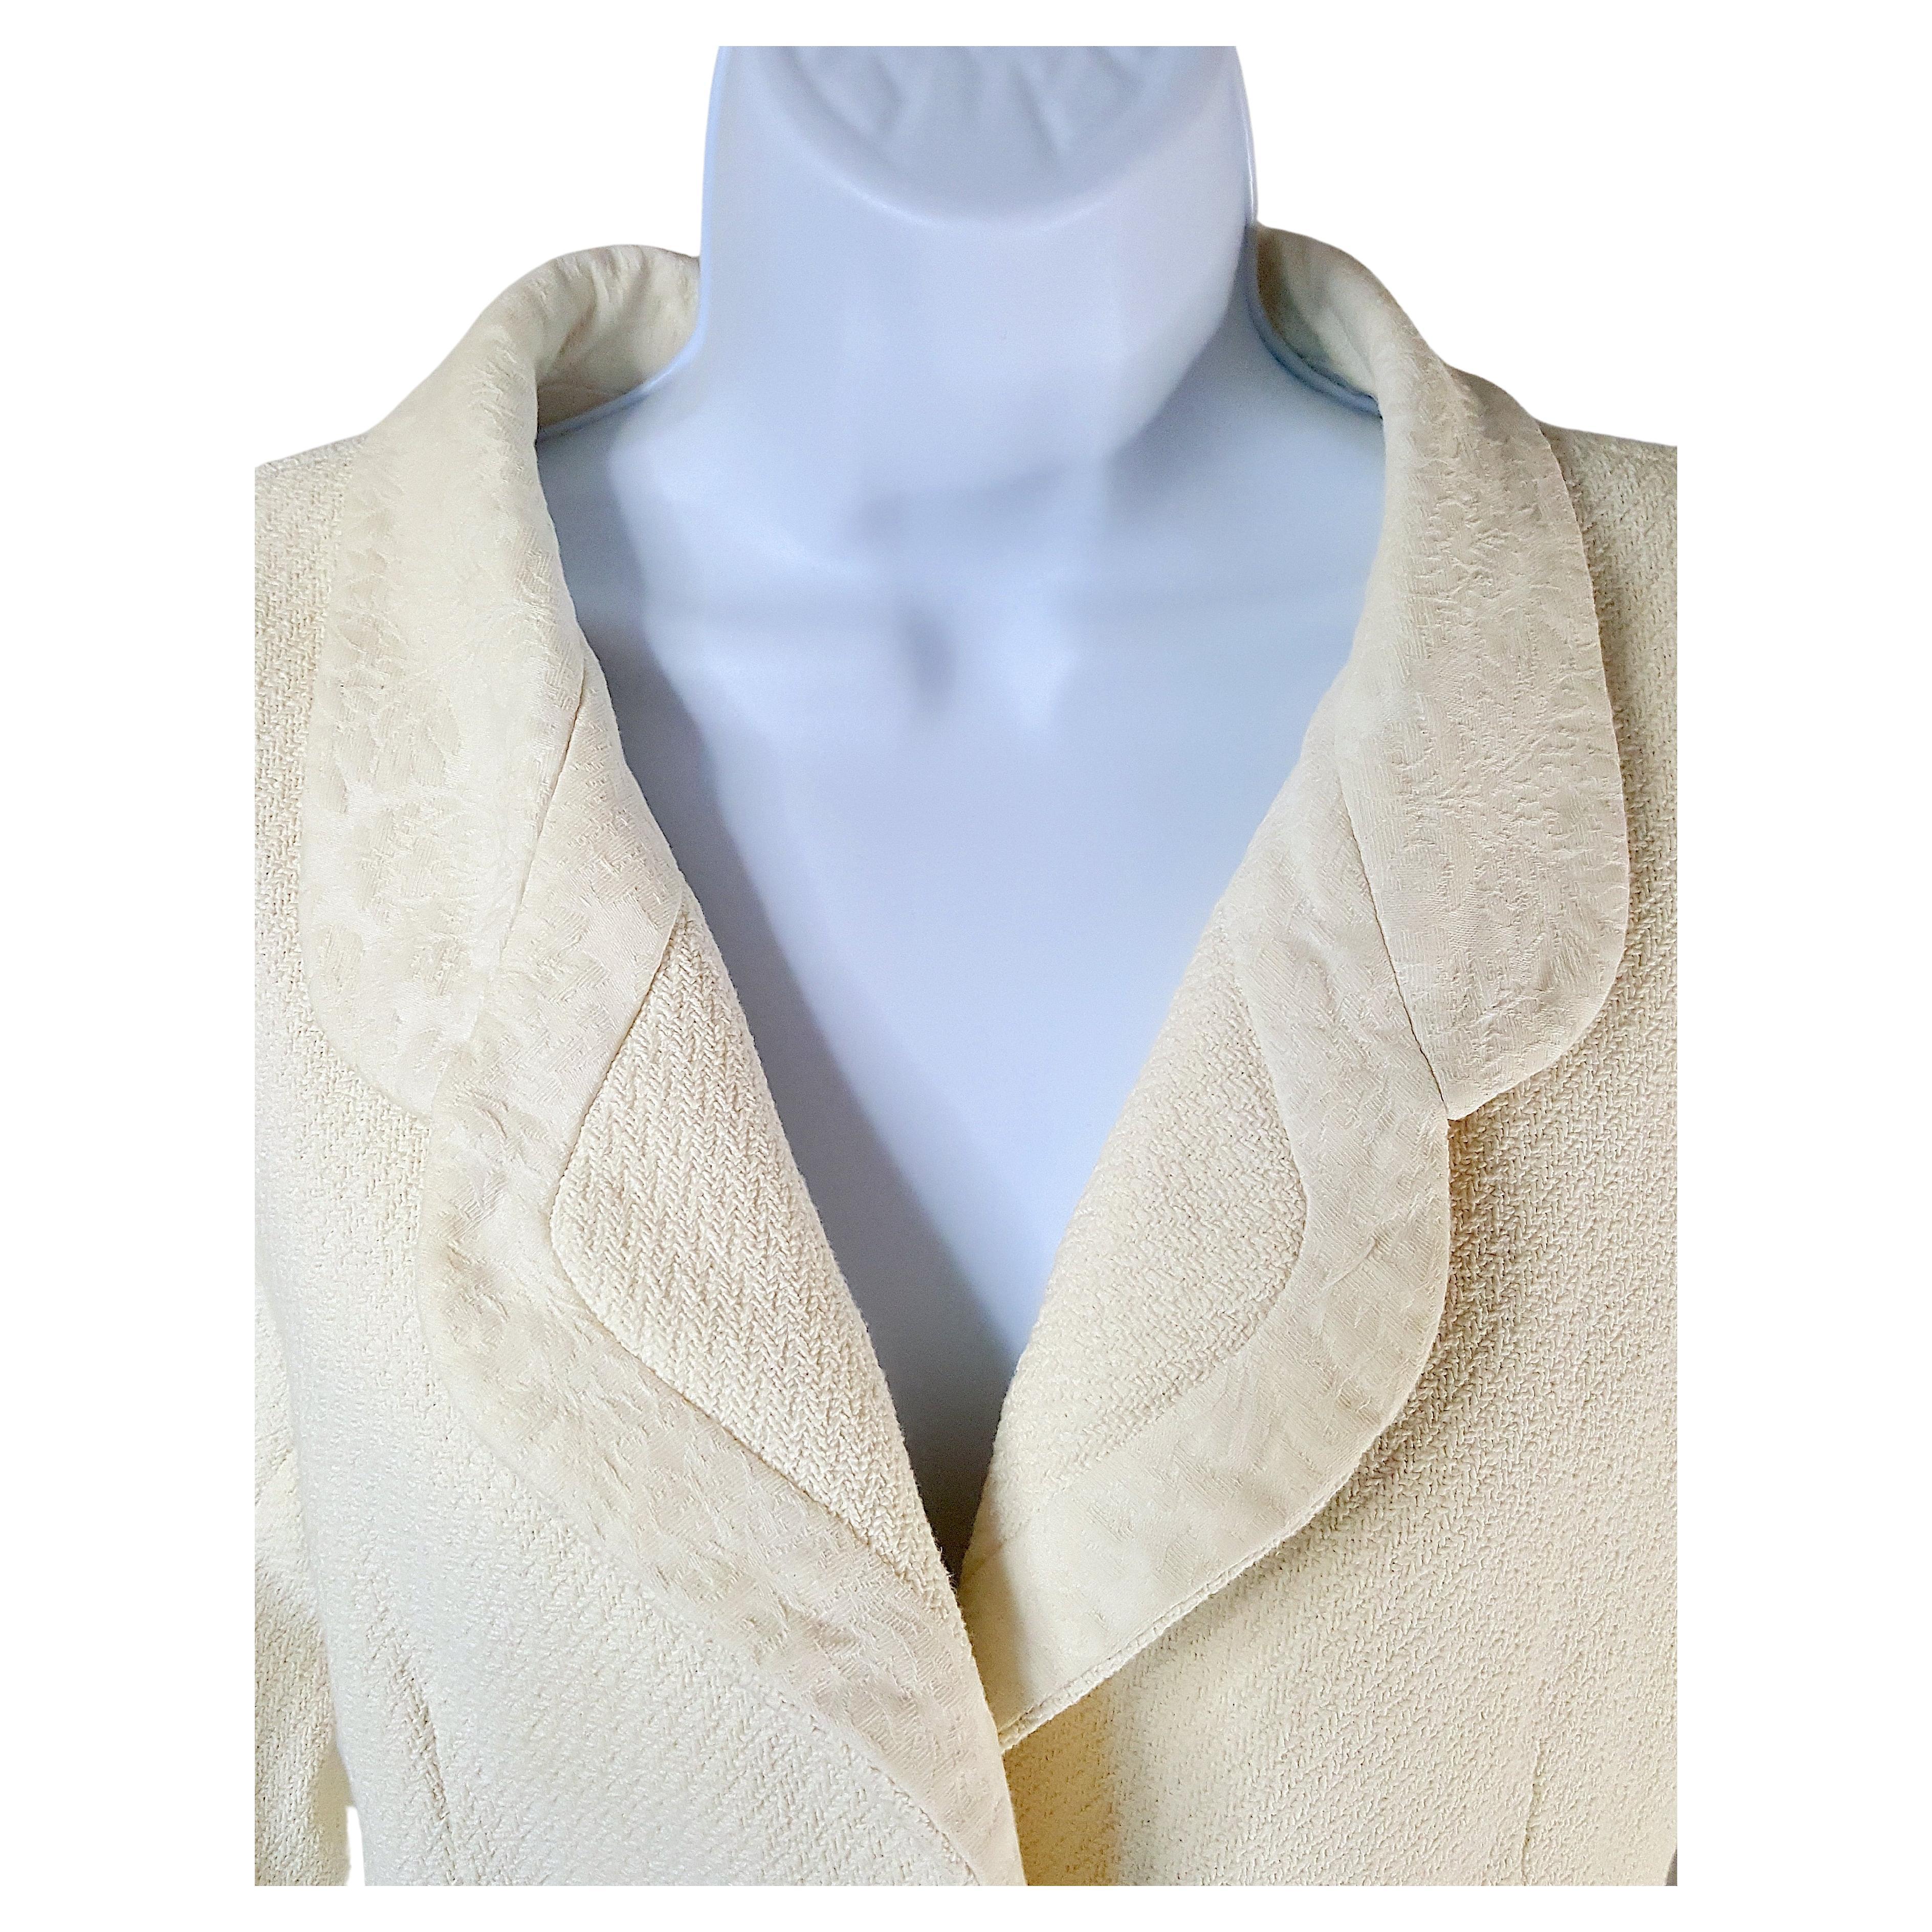 Lauded for his innovative couture-like construction with atypical ready-to-wear luxurious fabrics tailored to perfection in the 2000s, French-born Nicholas Ghesqueire designed for Balenciaga Spring/Summer 2006 this cream 100%-cotton brocade-accented